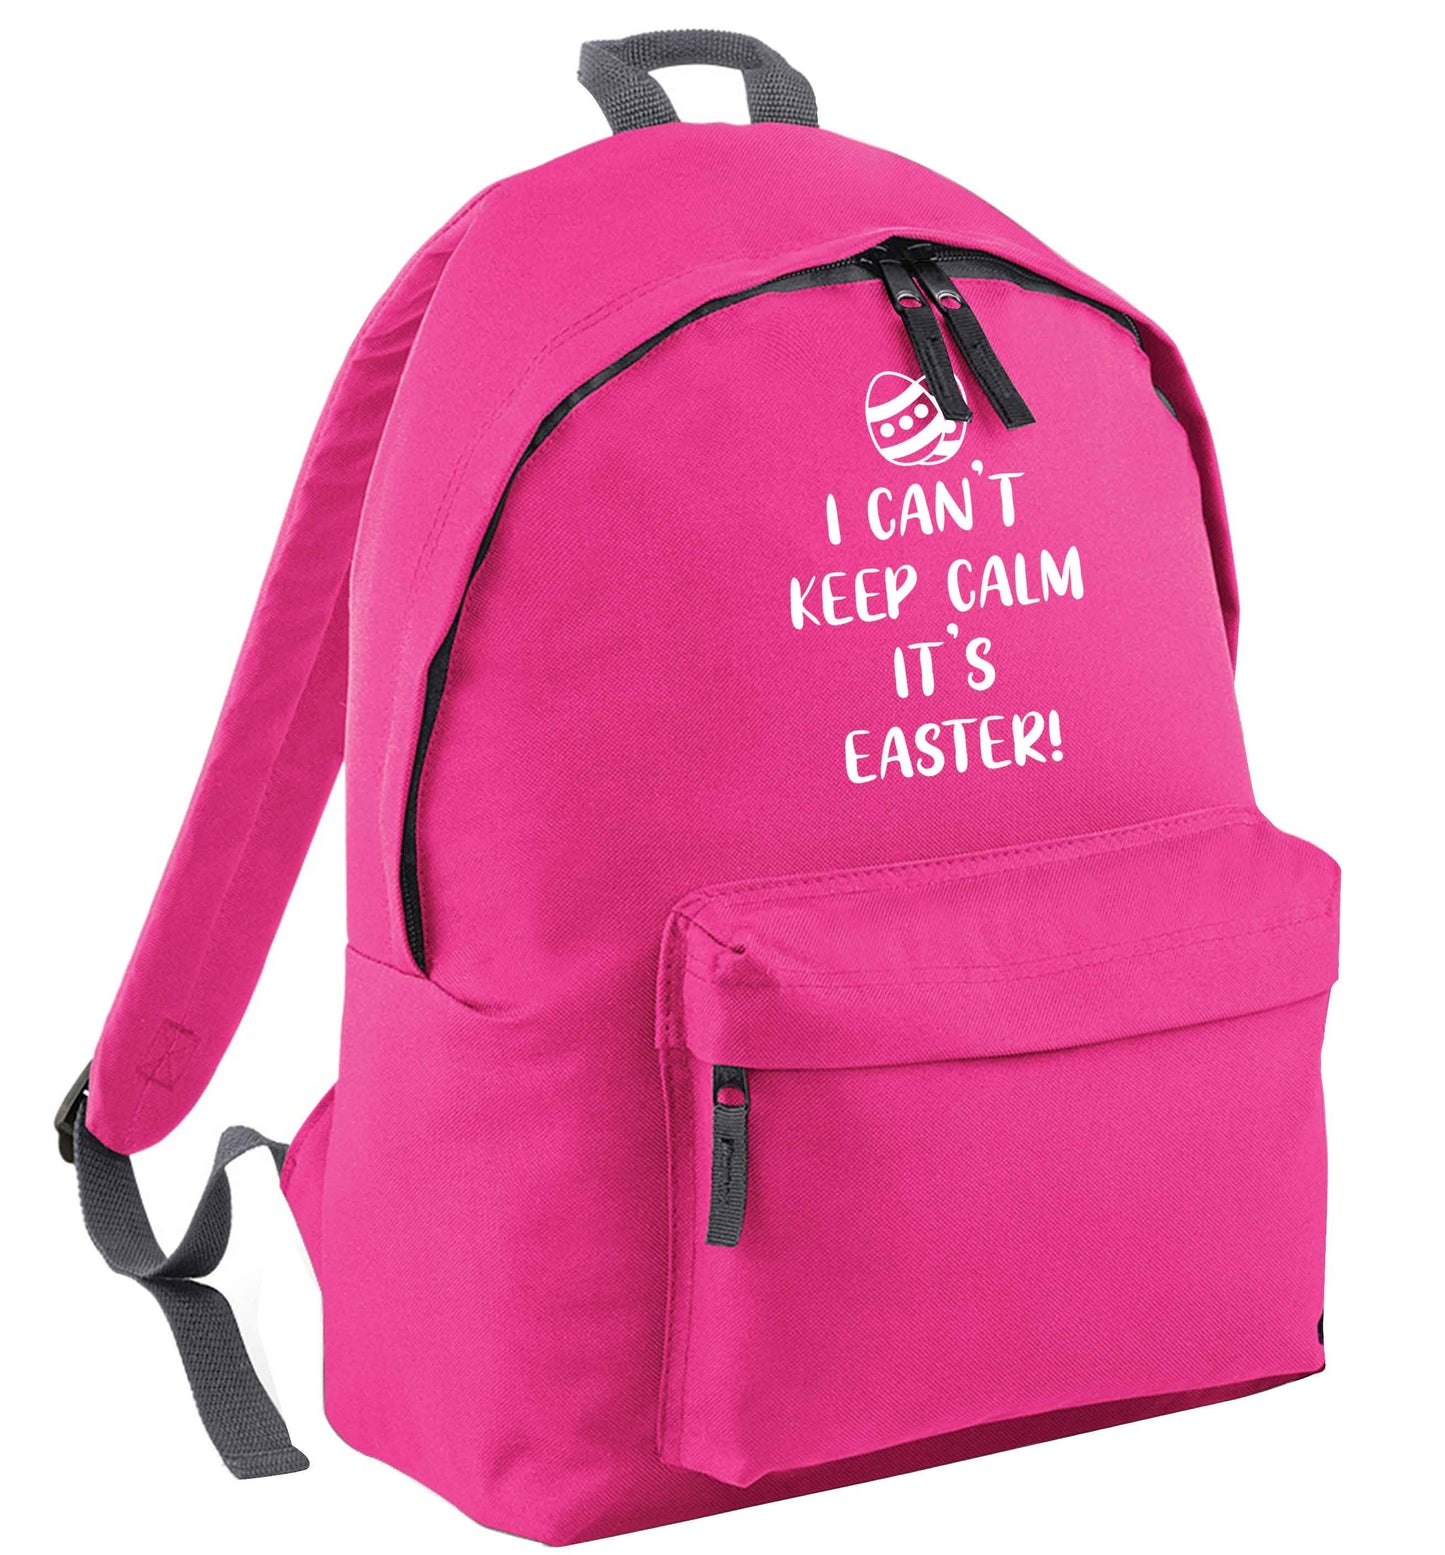 I can't keep calm it's Easter pink adults backpack